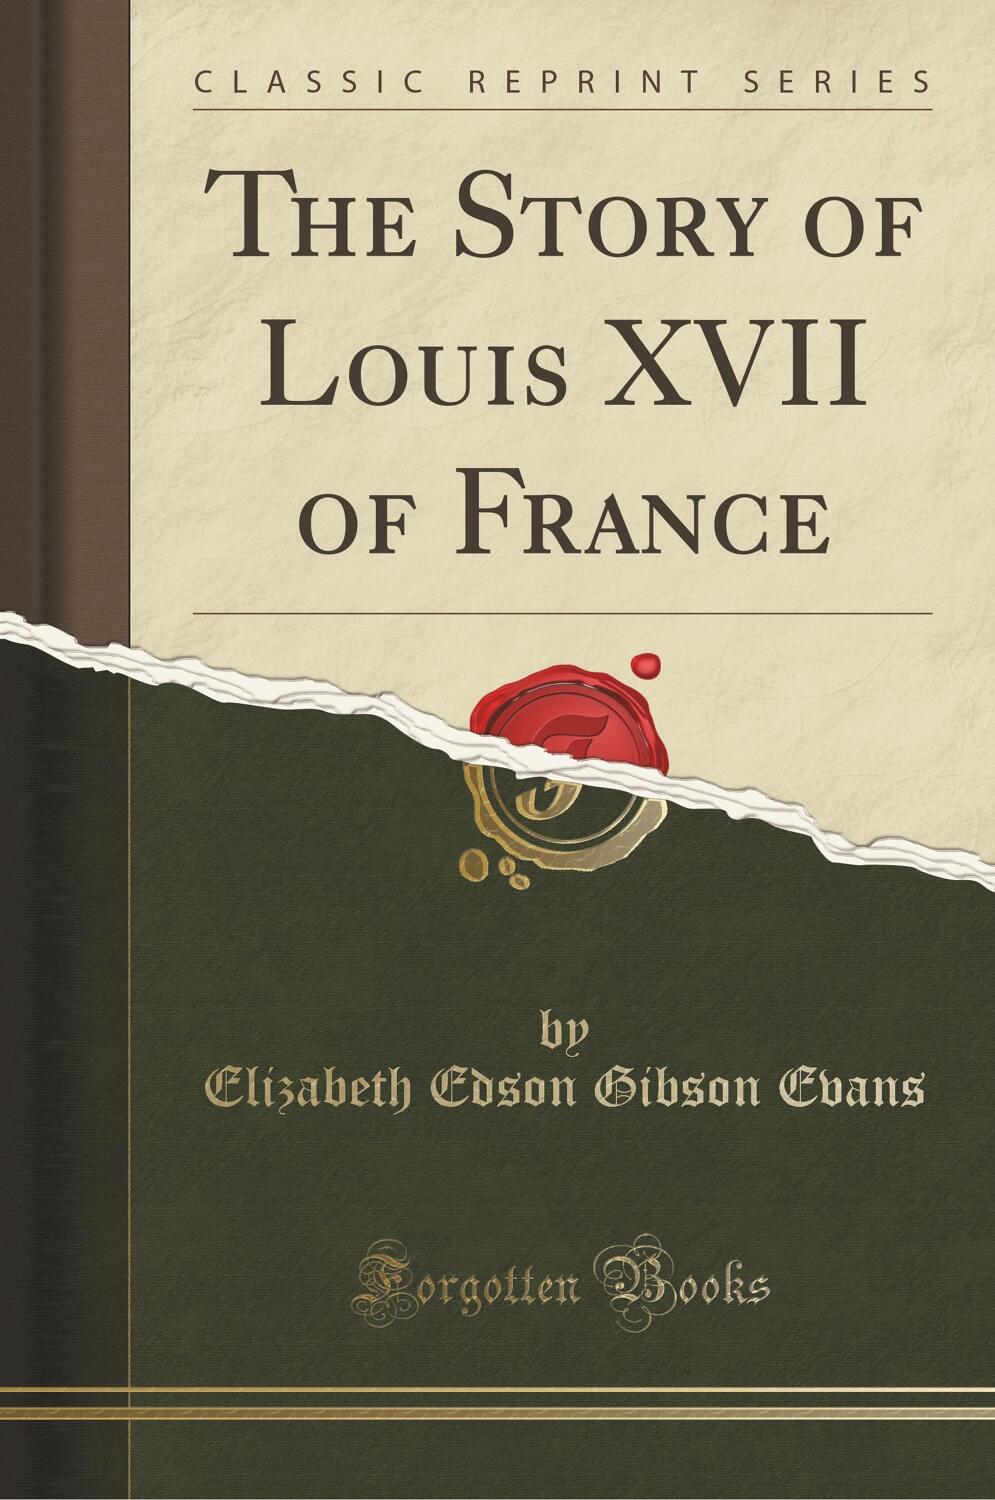 The Story of Louis XVII of France (Classic Reprint)